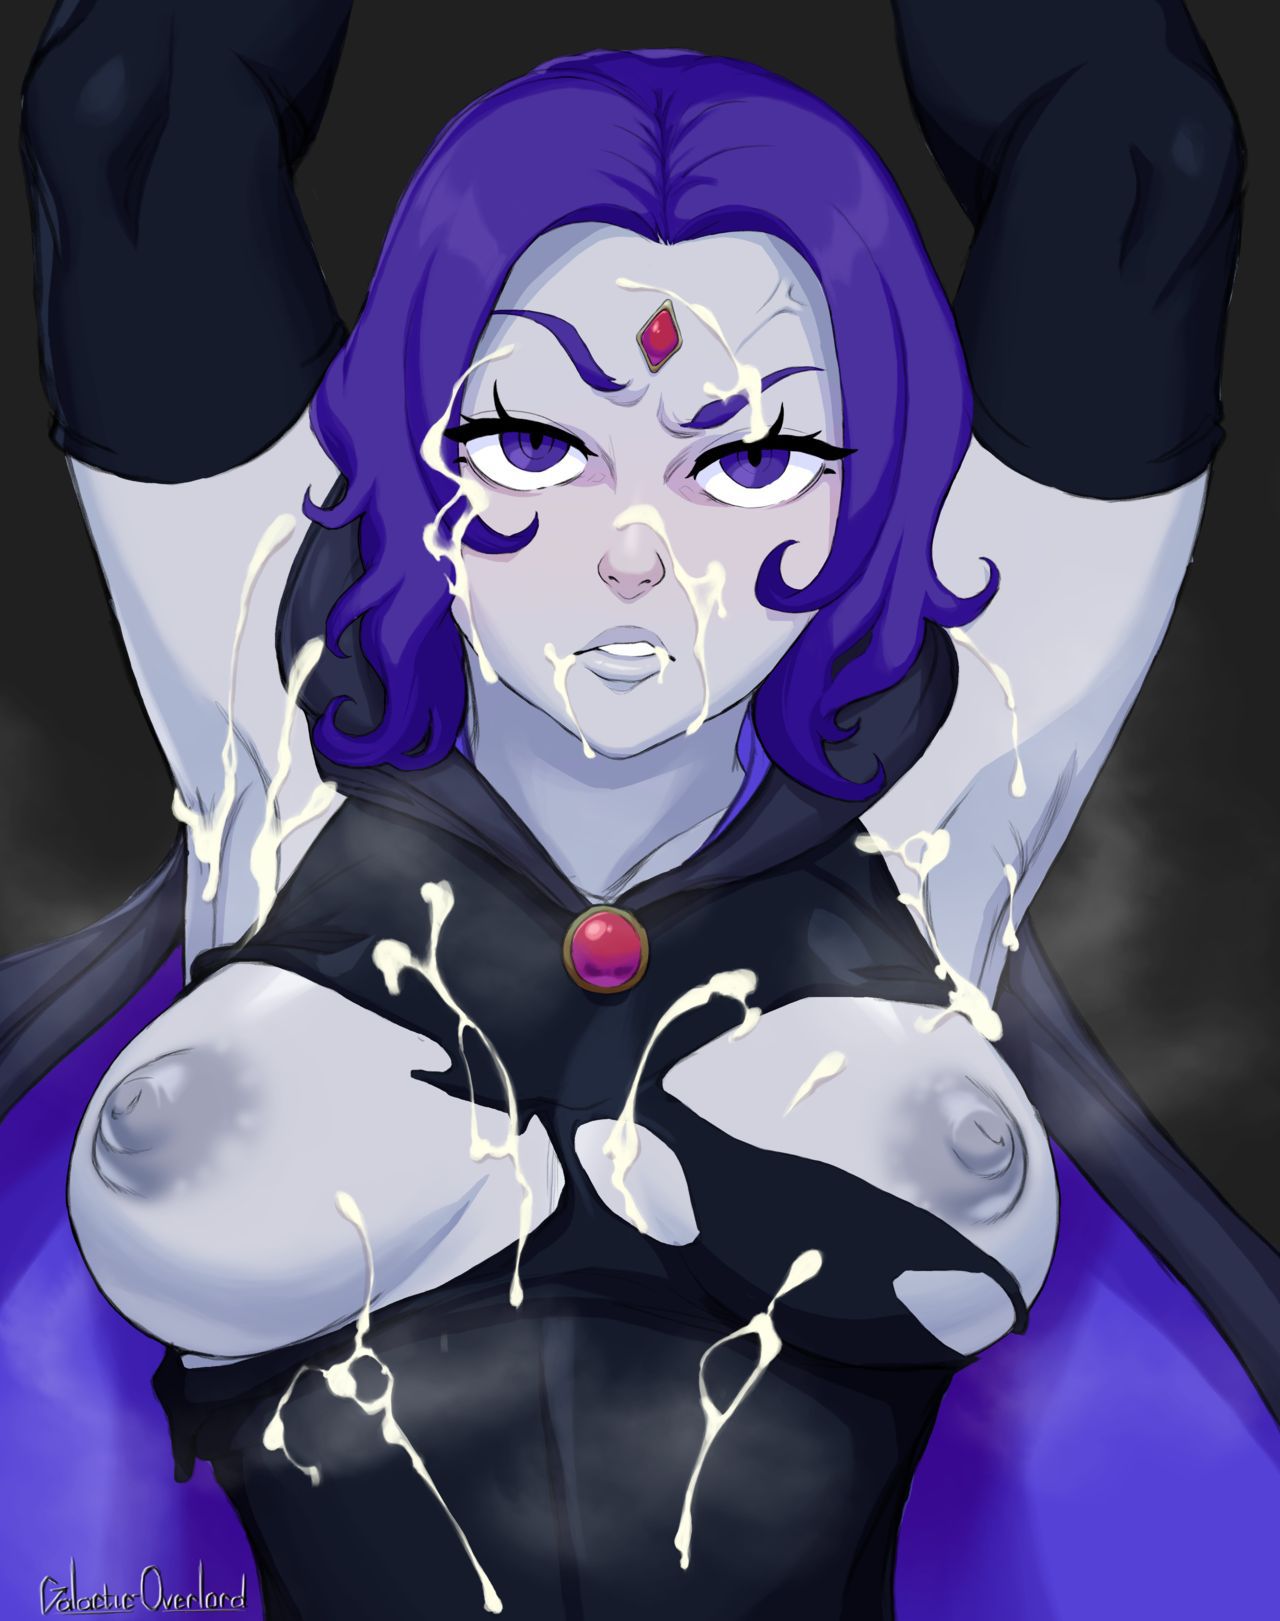 [GalacticOverlord] Raven 2